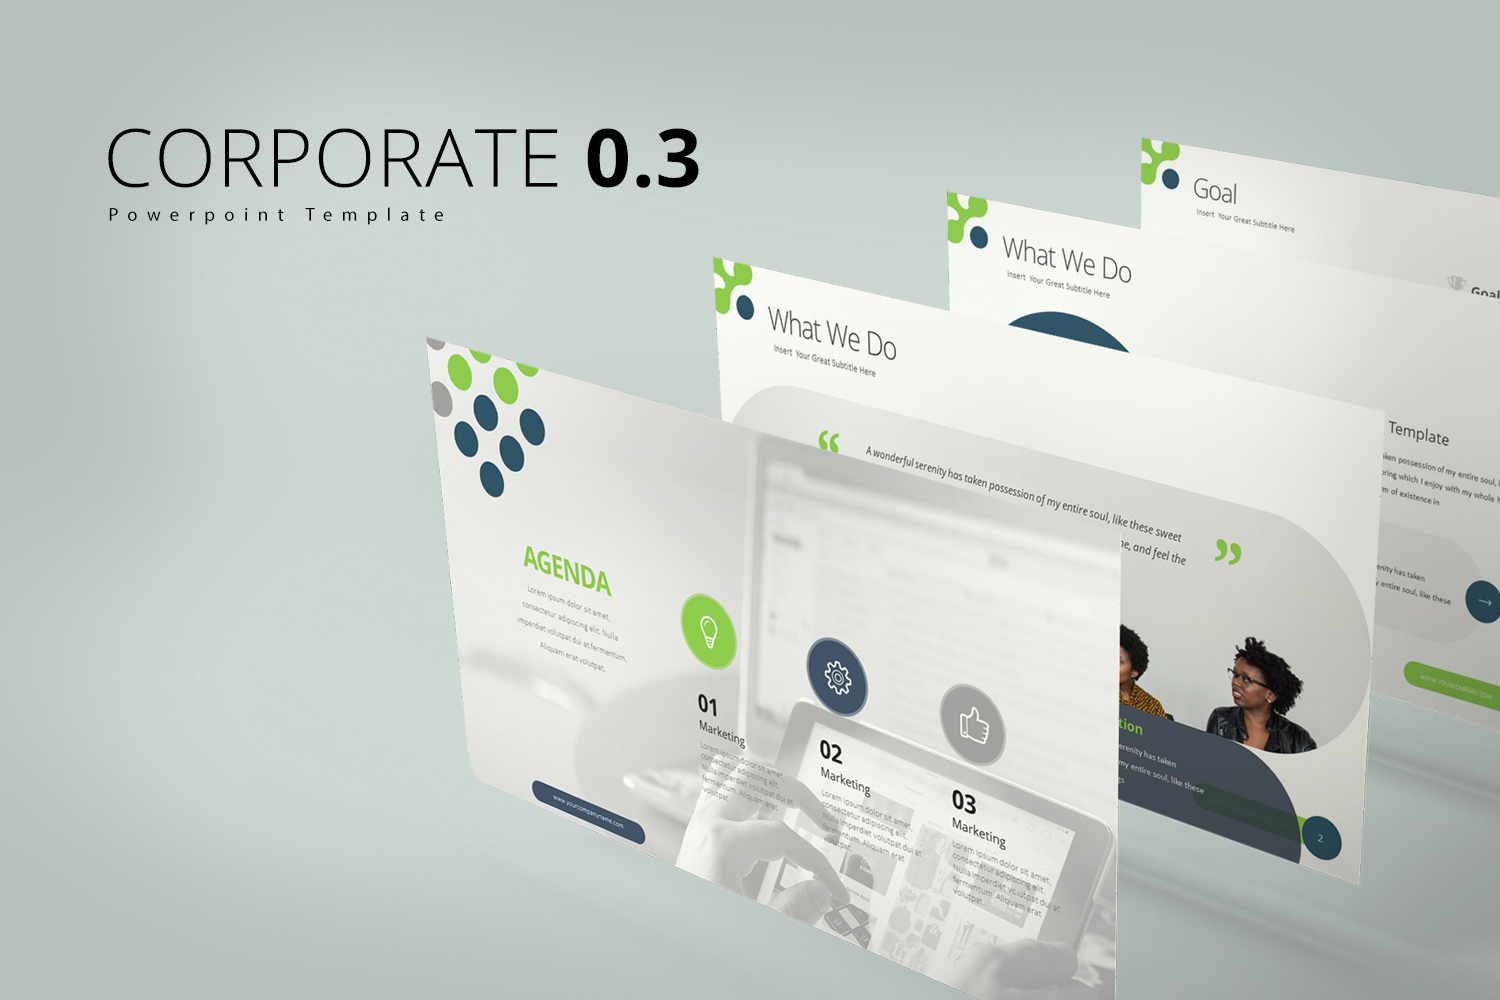 Corporate 0.3 PowerPoint template